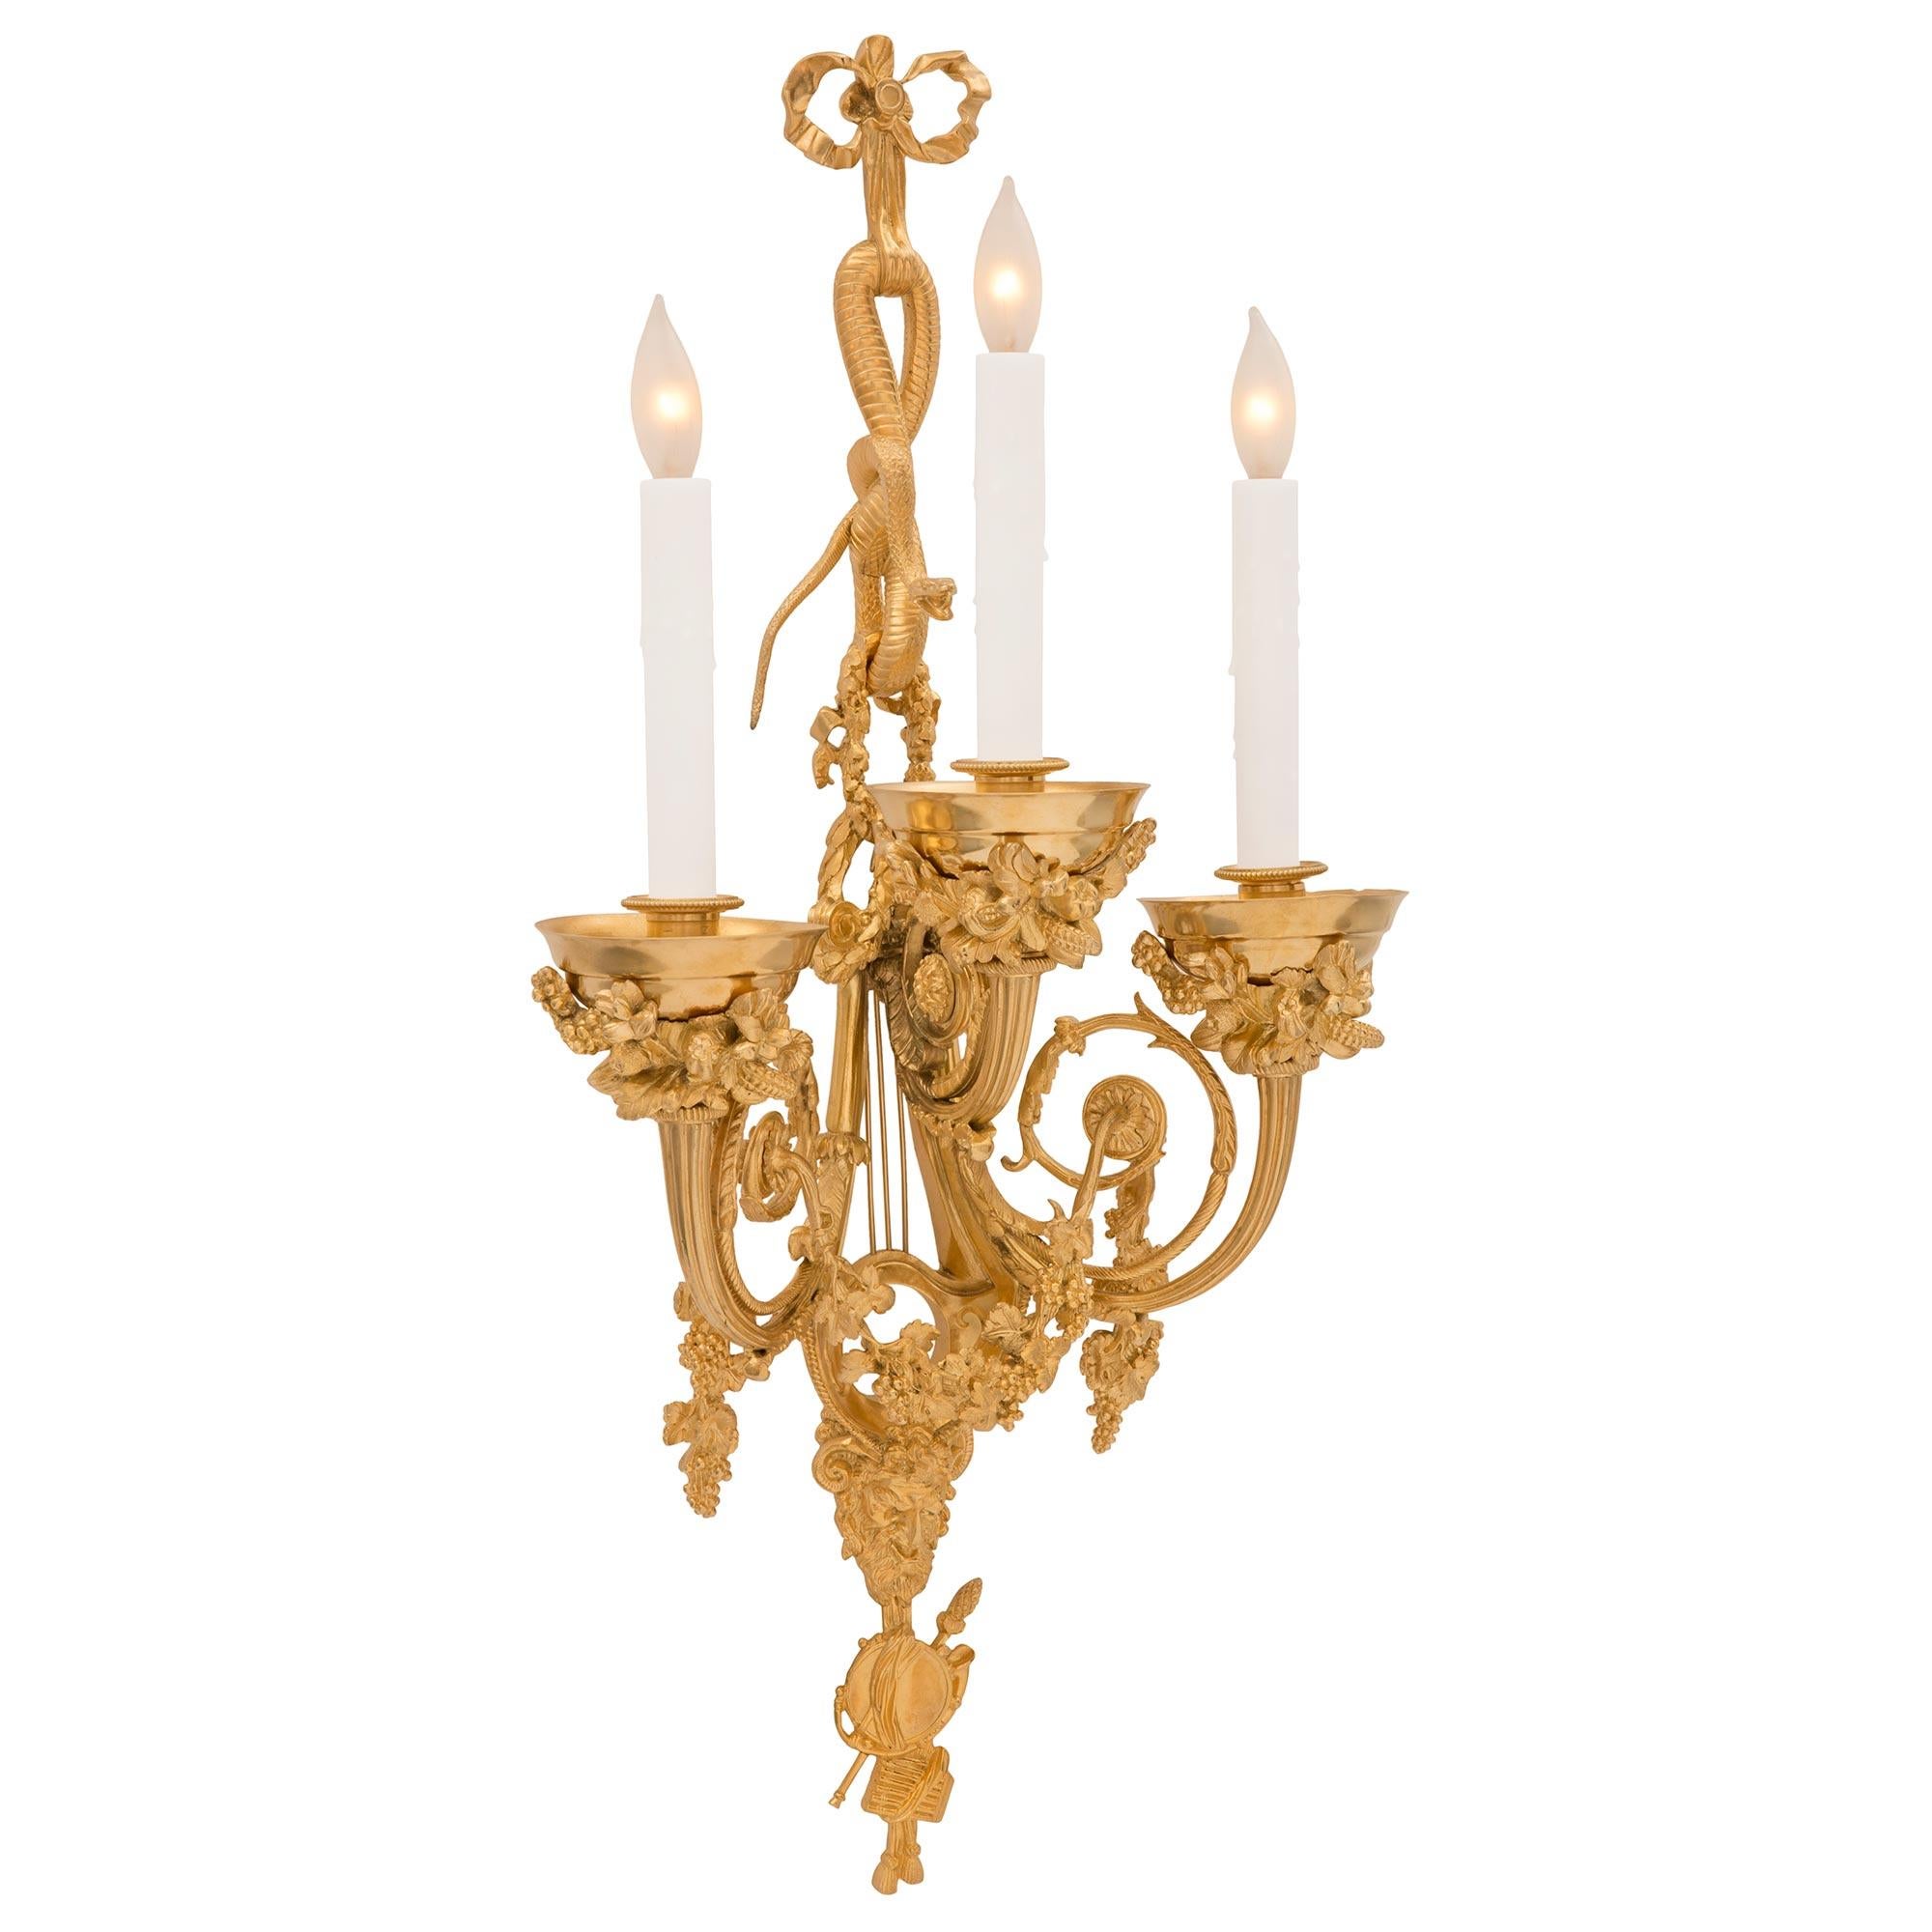 A stunning and very high quality French 19th century Louis XVI st. Belle Époque period ormolu sconces, signed Vian. Each sconce is centered by beautiful finely detailed musical instruments at the base with a tambourine, pan flute, French horn, and